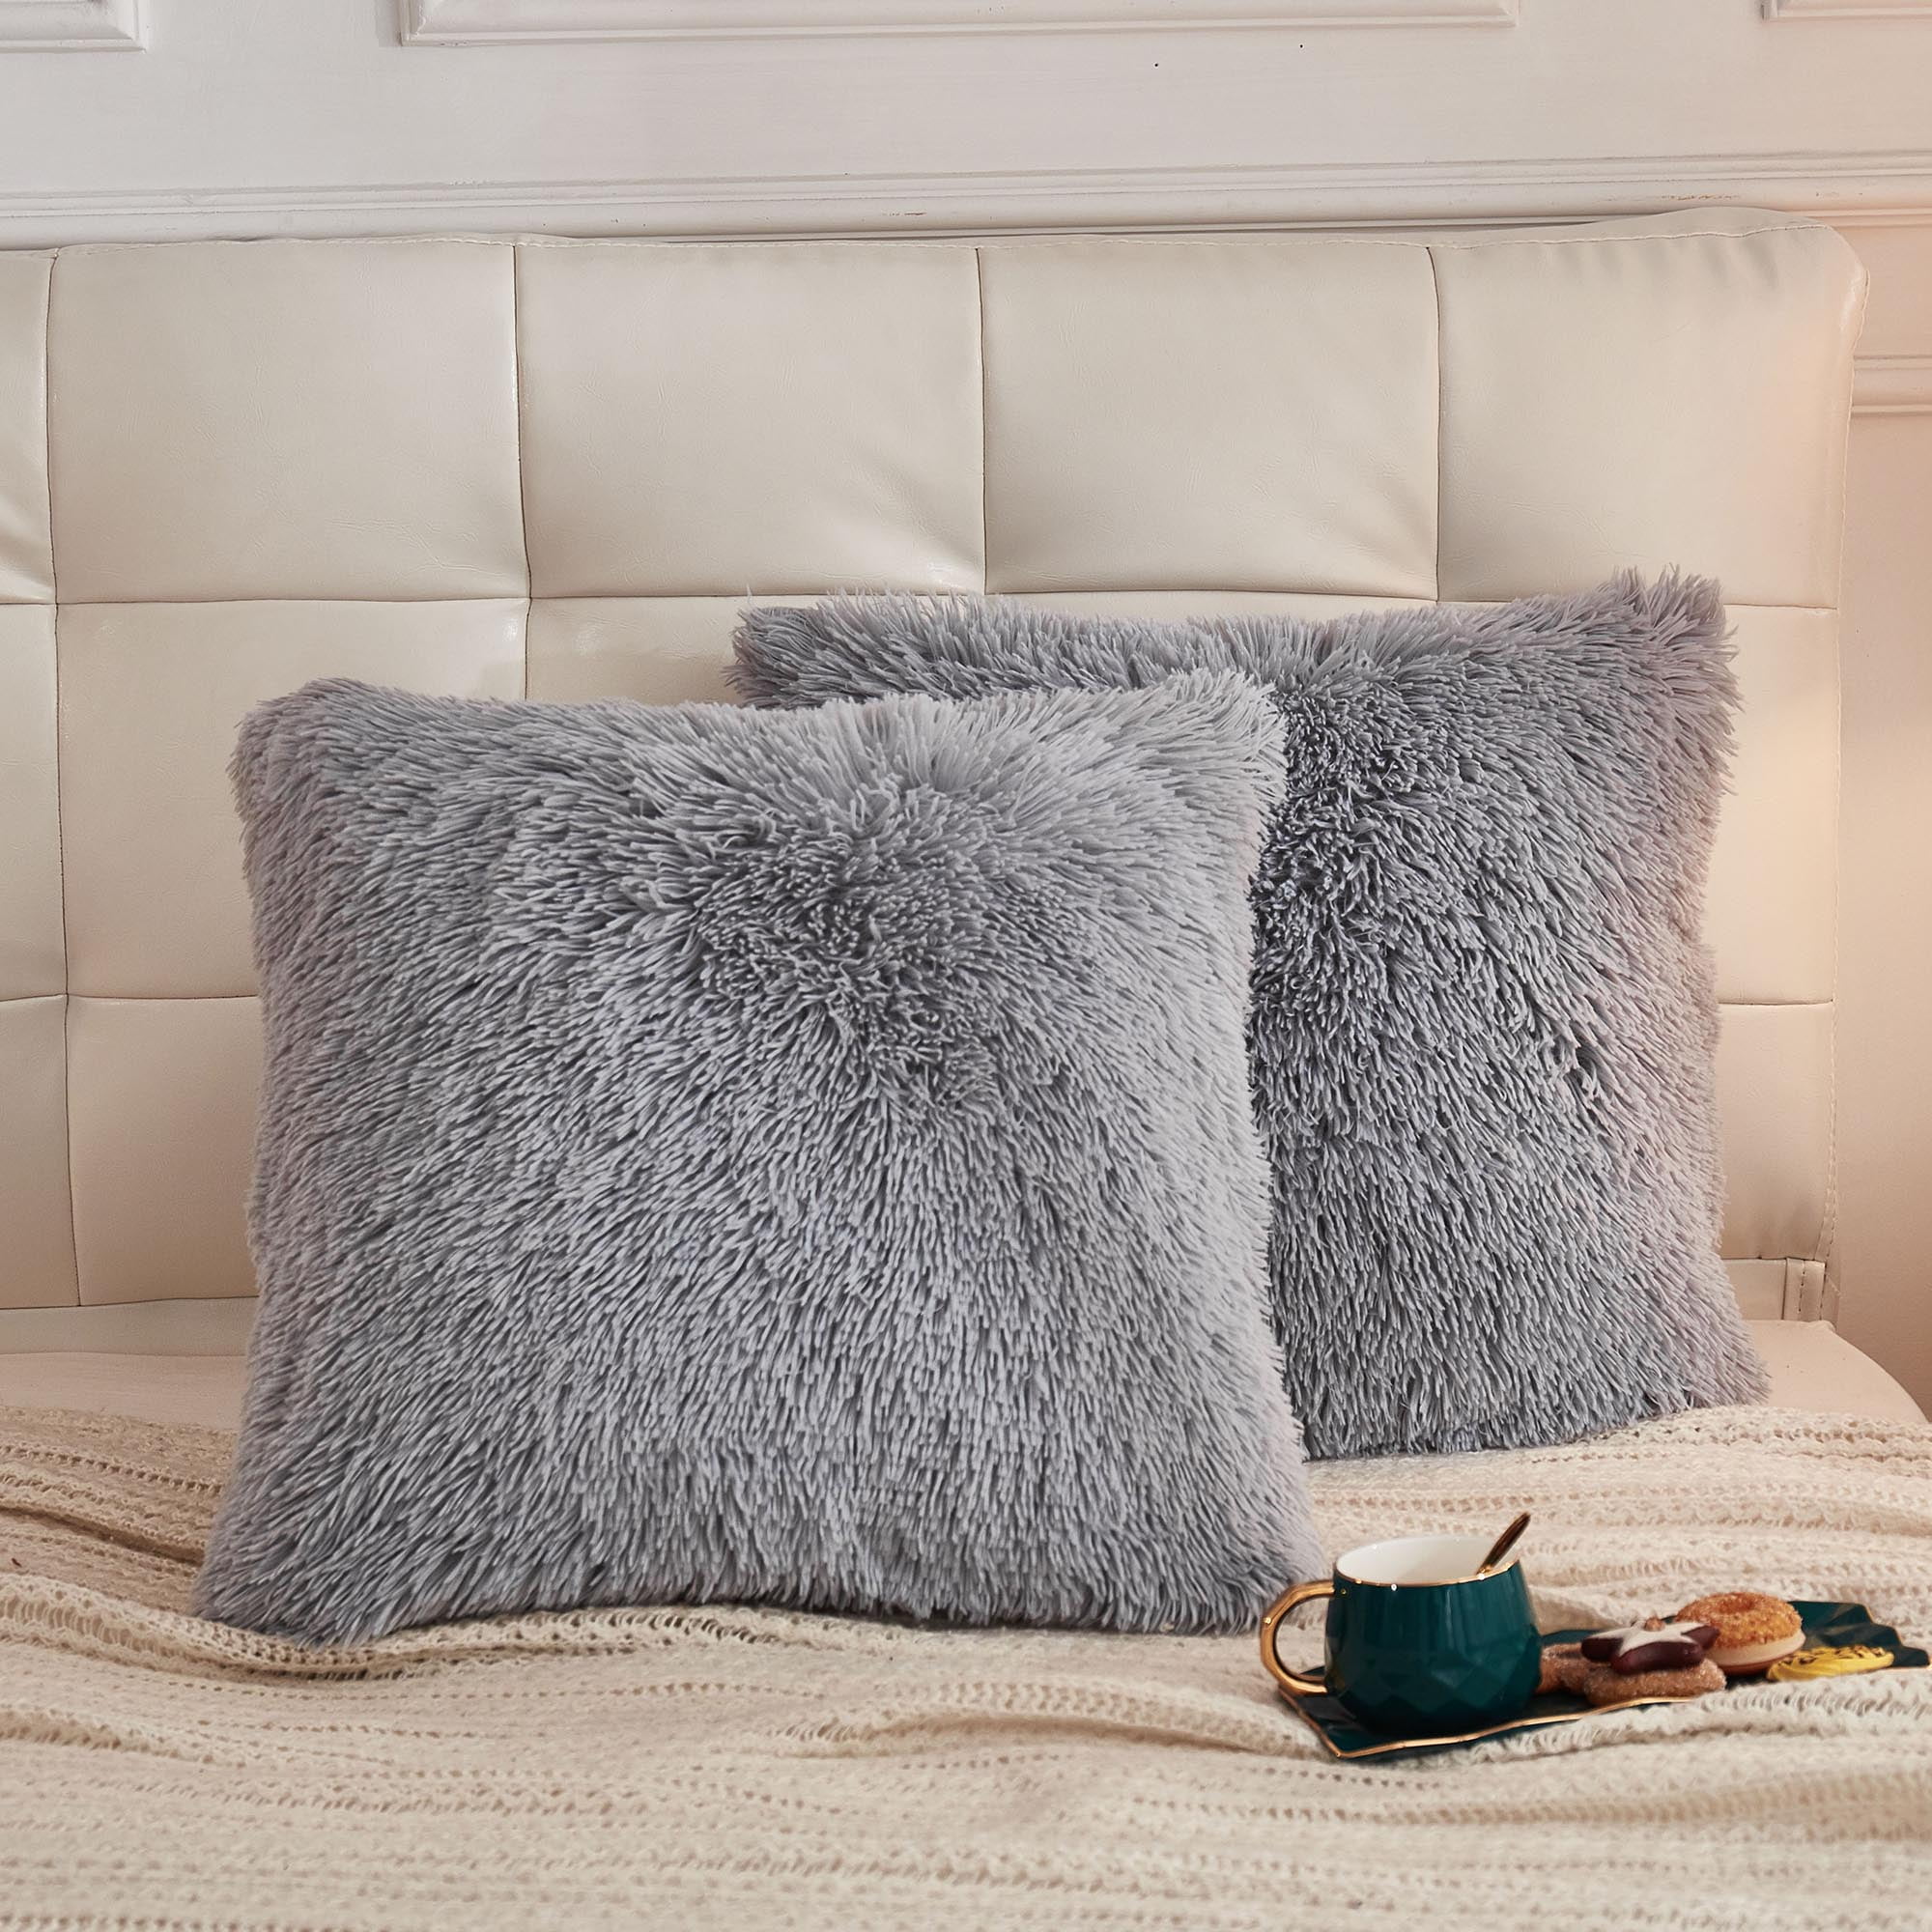 18-inch Plush Pillow – Luxury Square Accent Pillow Insert And Shag